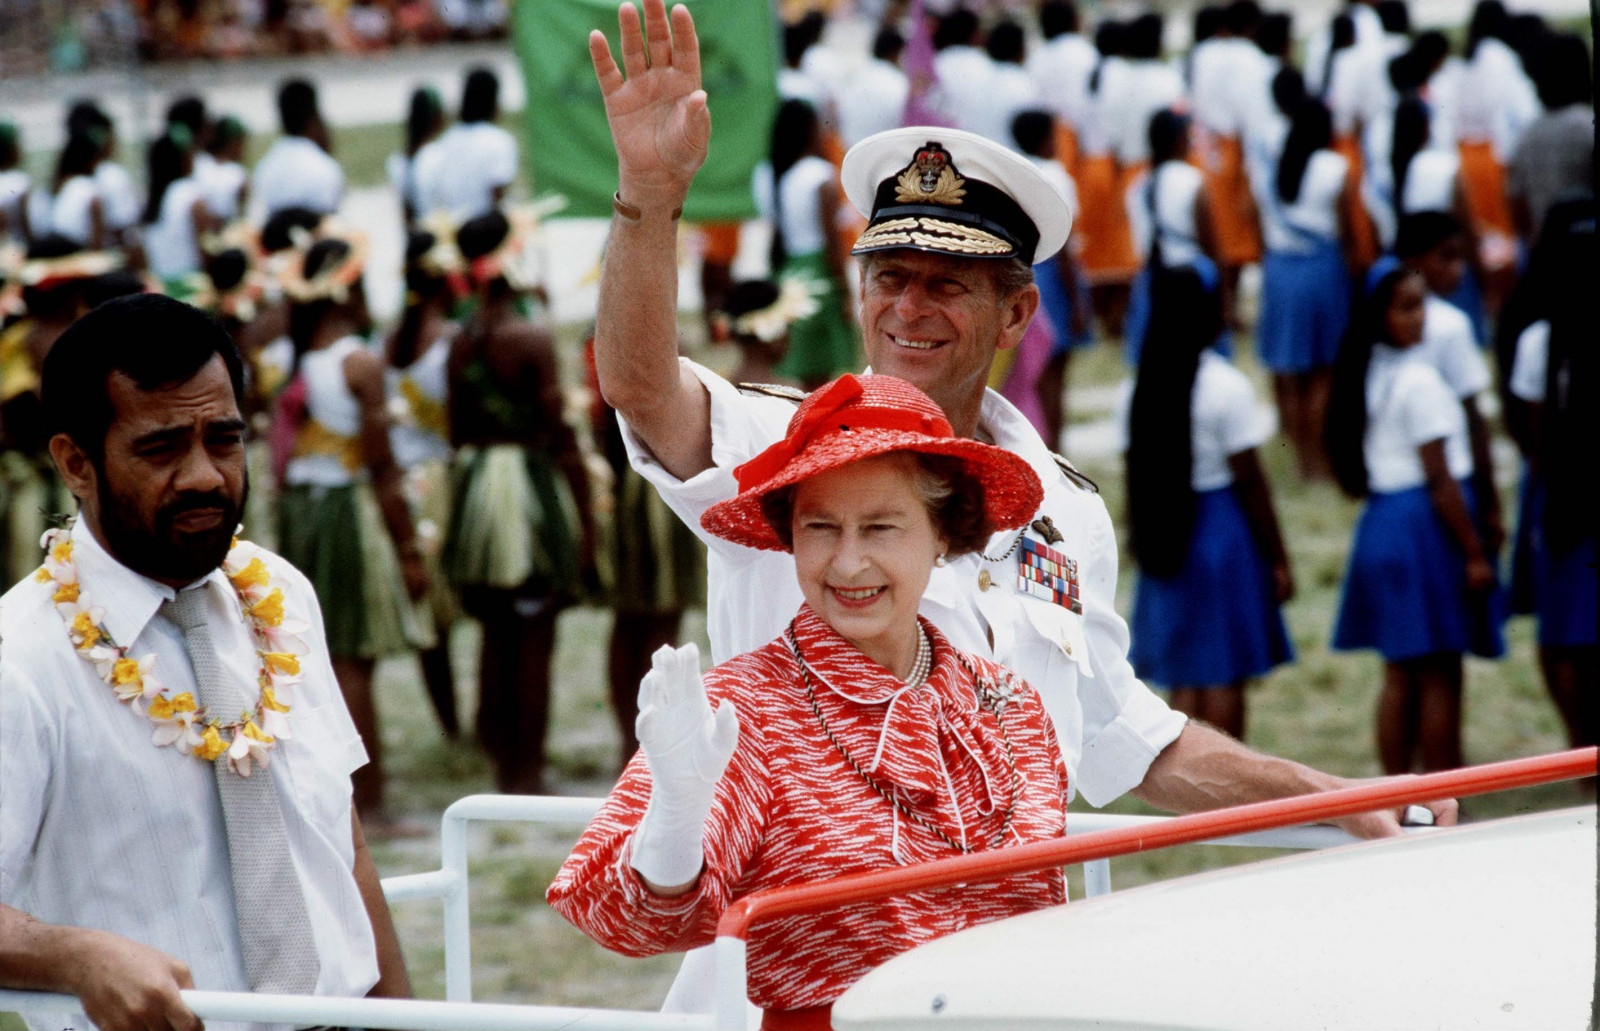 Why Queen Elizabeth visited Ghana and danced with Nkrumah